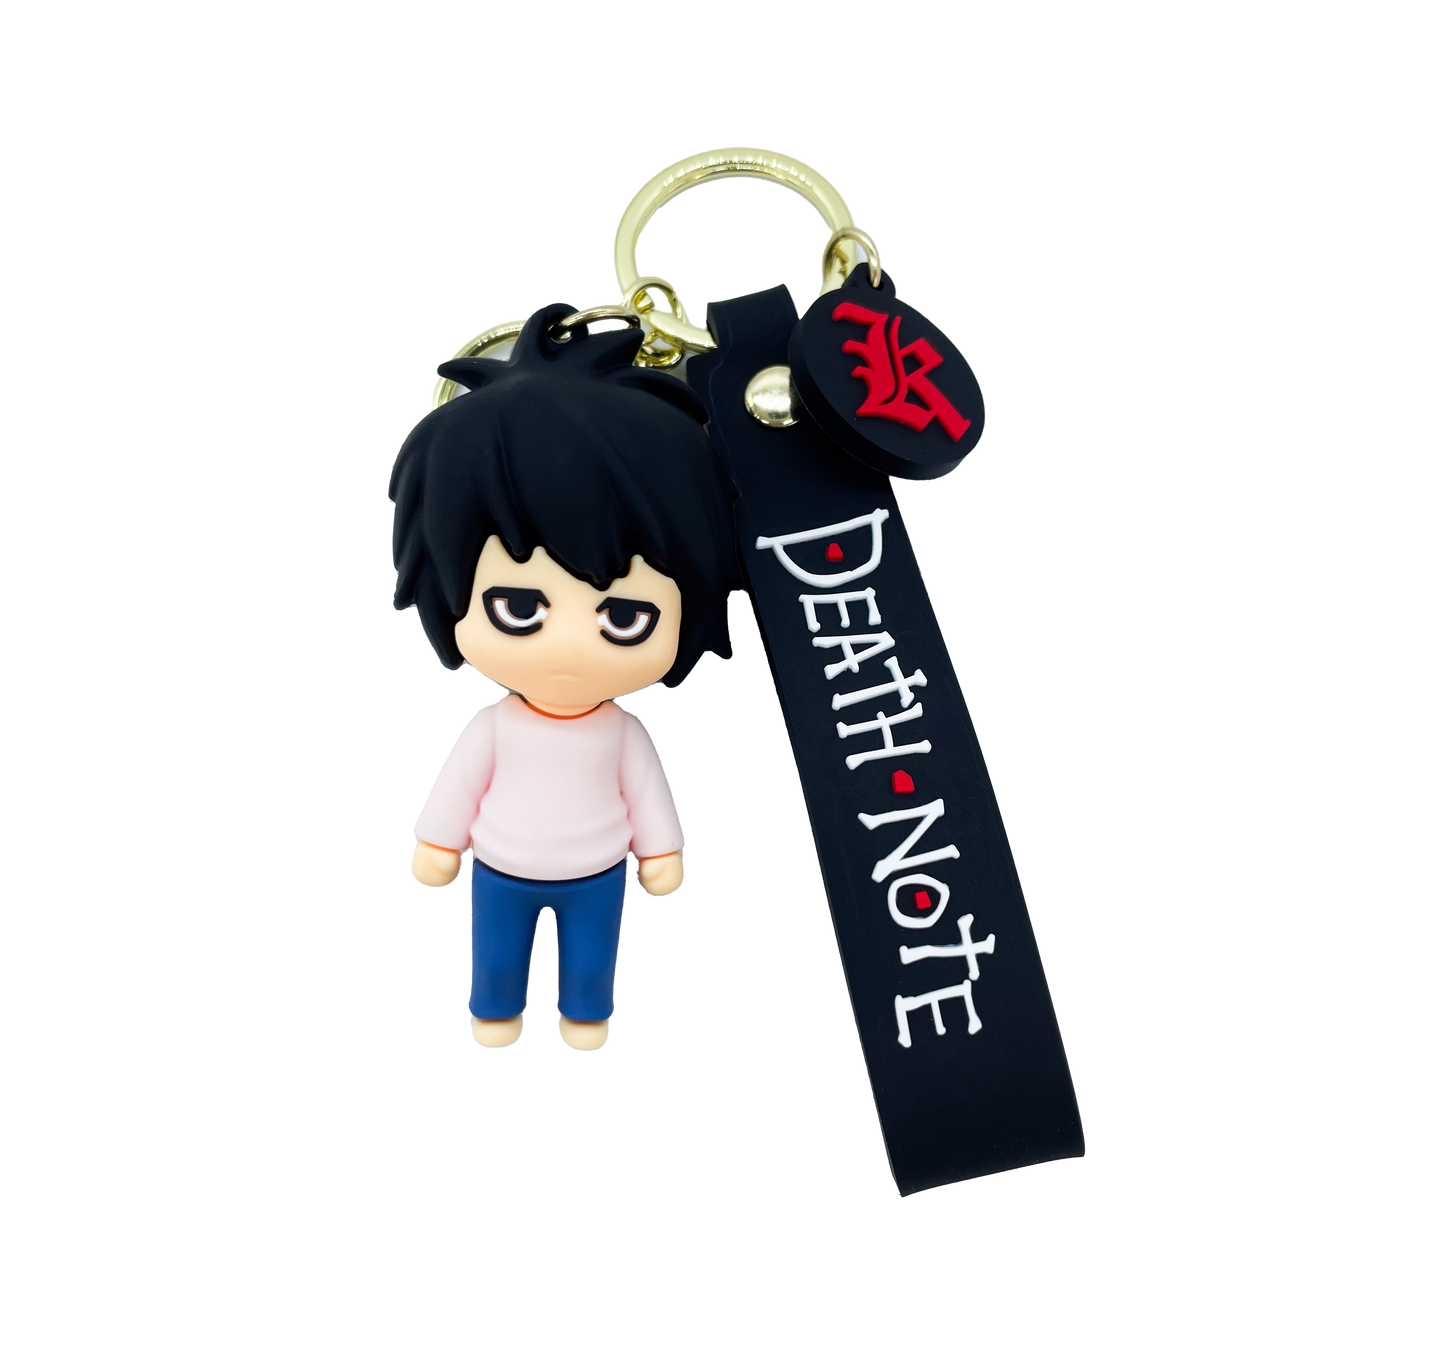 Silicon Character Keychain Asst.